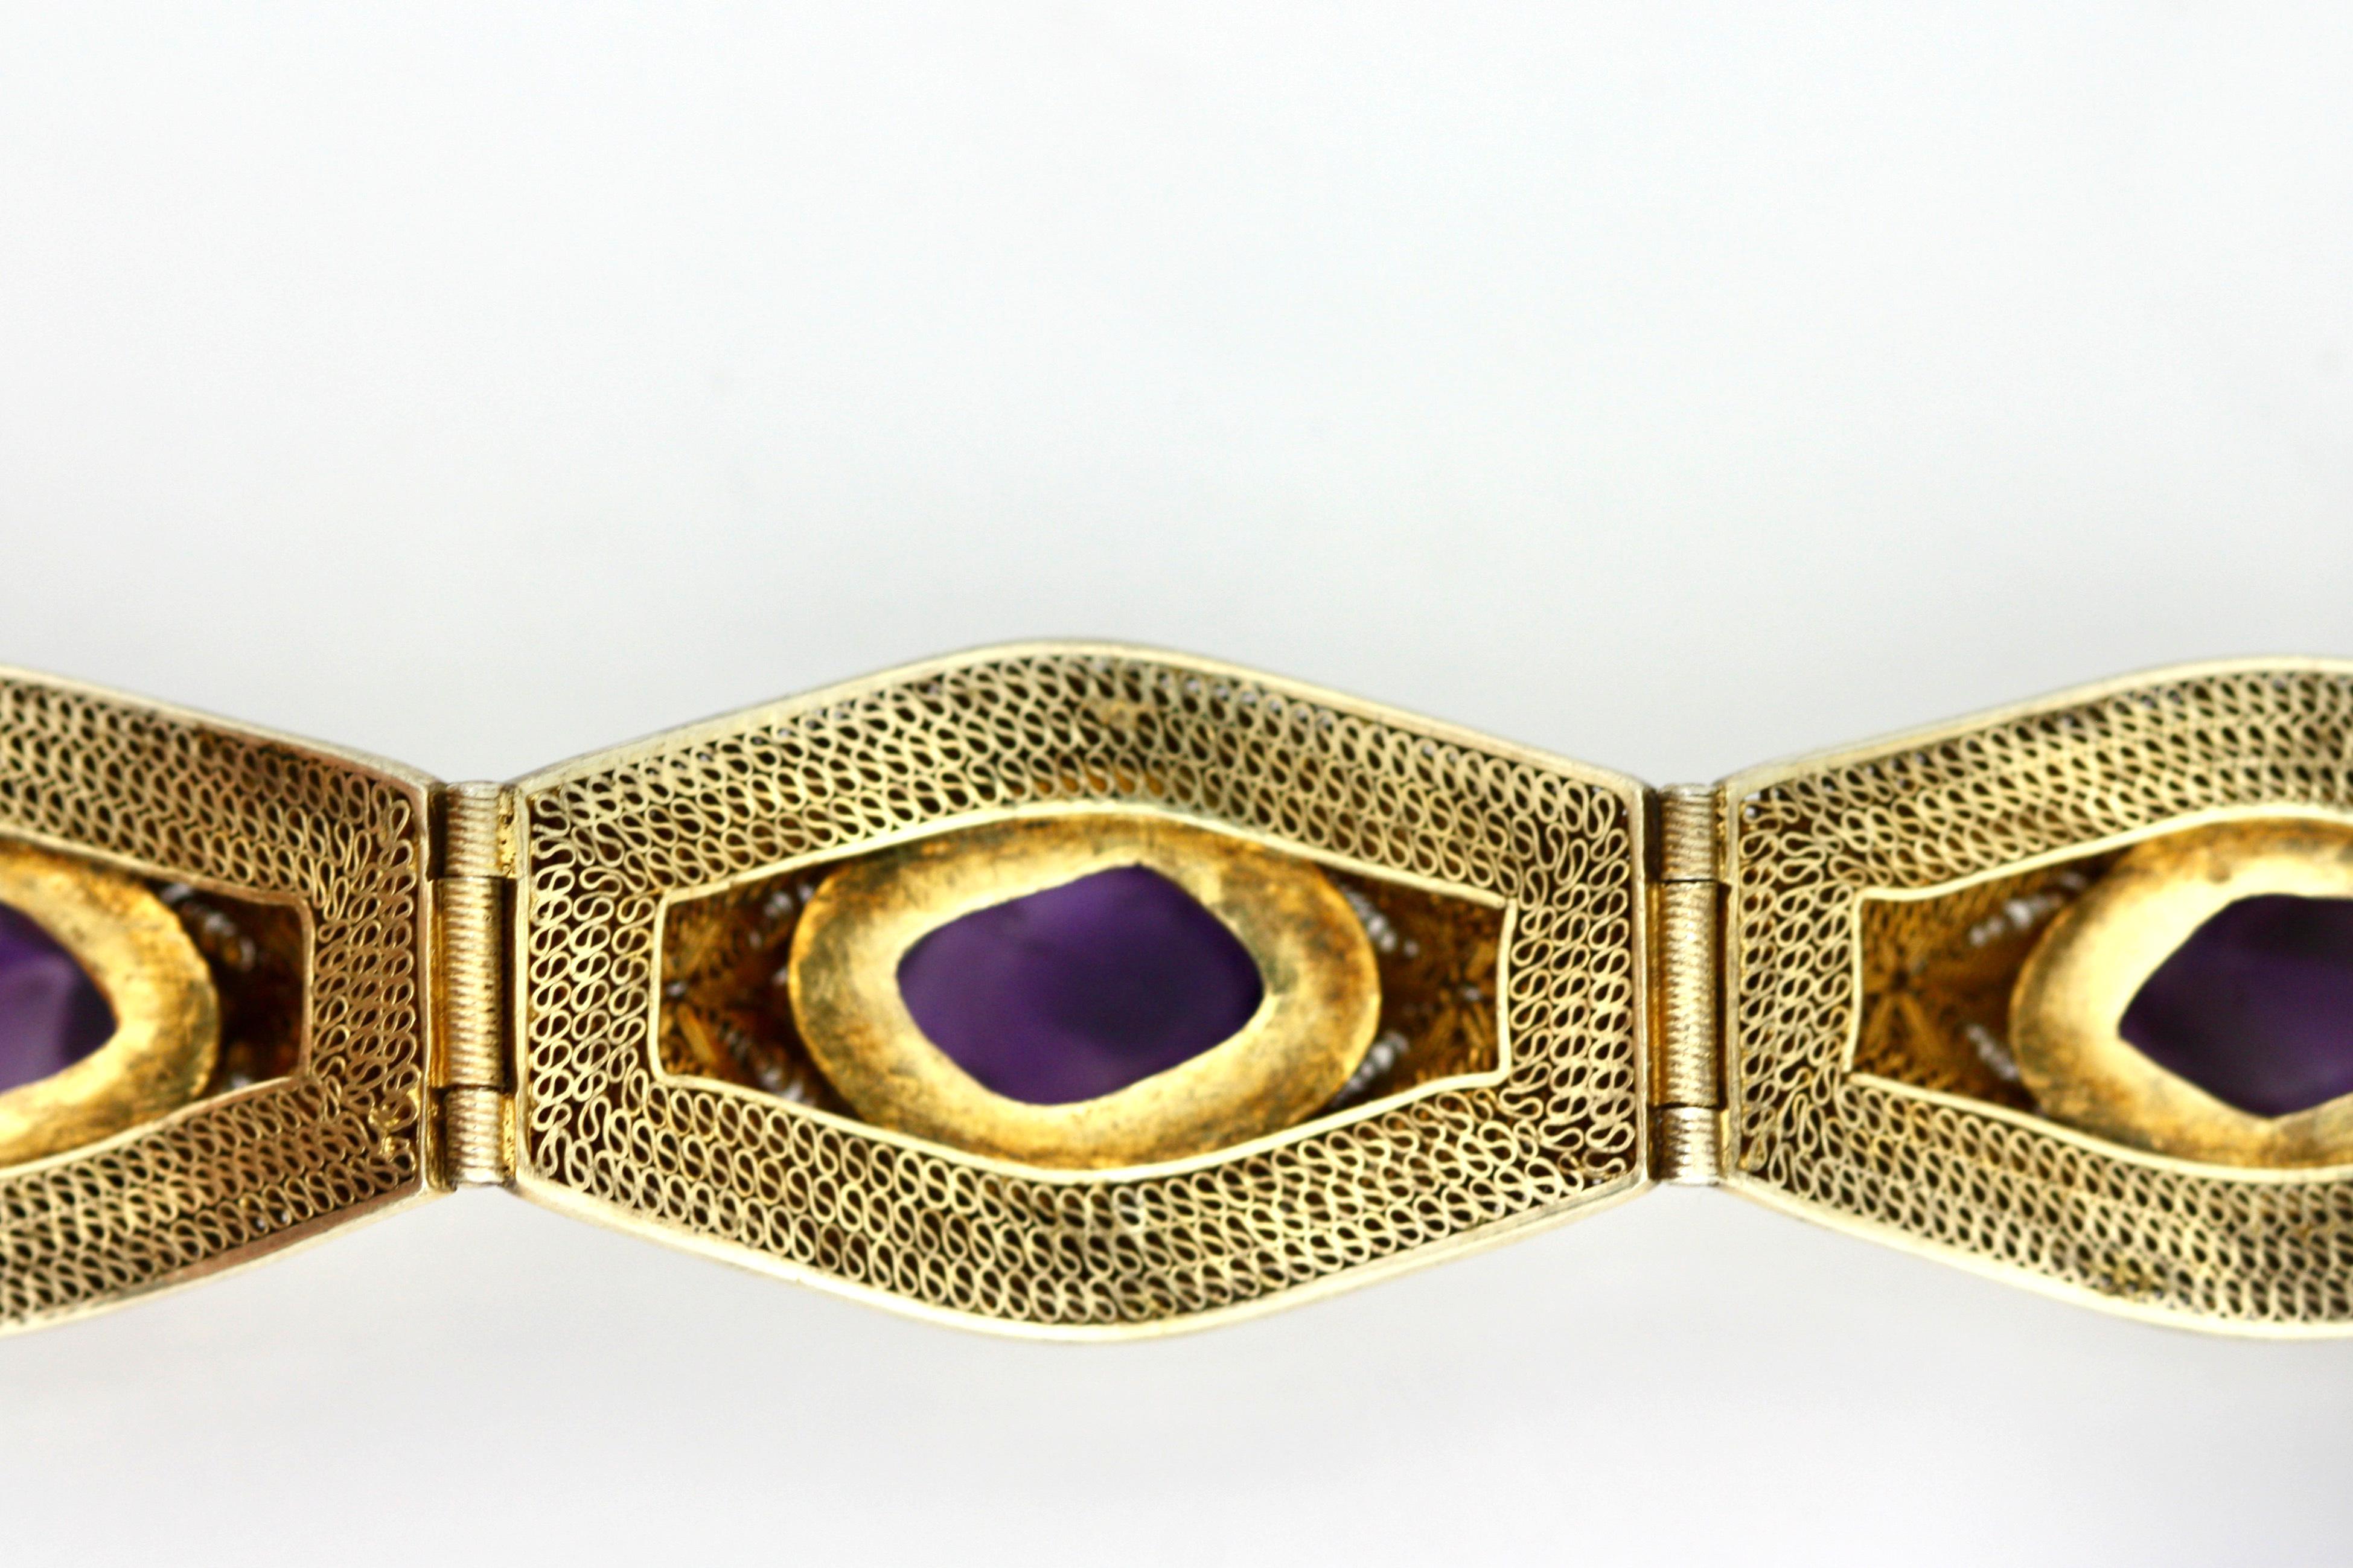 Colored Stone Silver-Gilt Bracelet In Good Condition For Sale In Palm Beach, FL